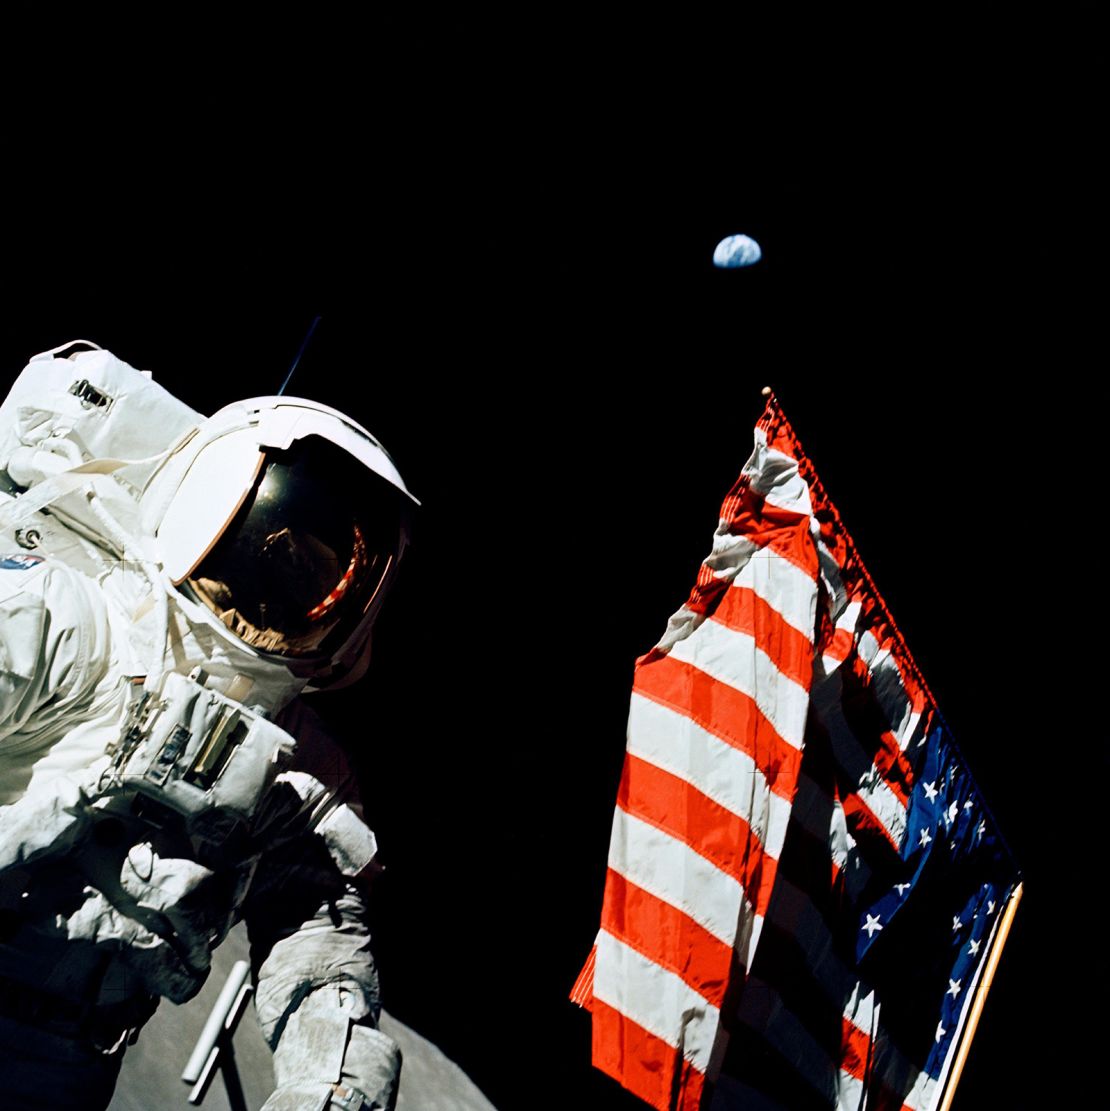 Astronaut Harrison Schmitt stands by the American flag during a moonwalk during Apollo 17, with Earth in the background.